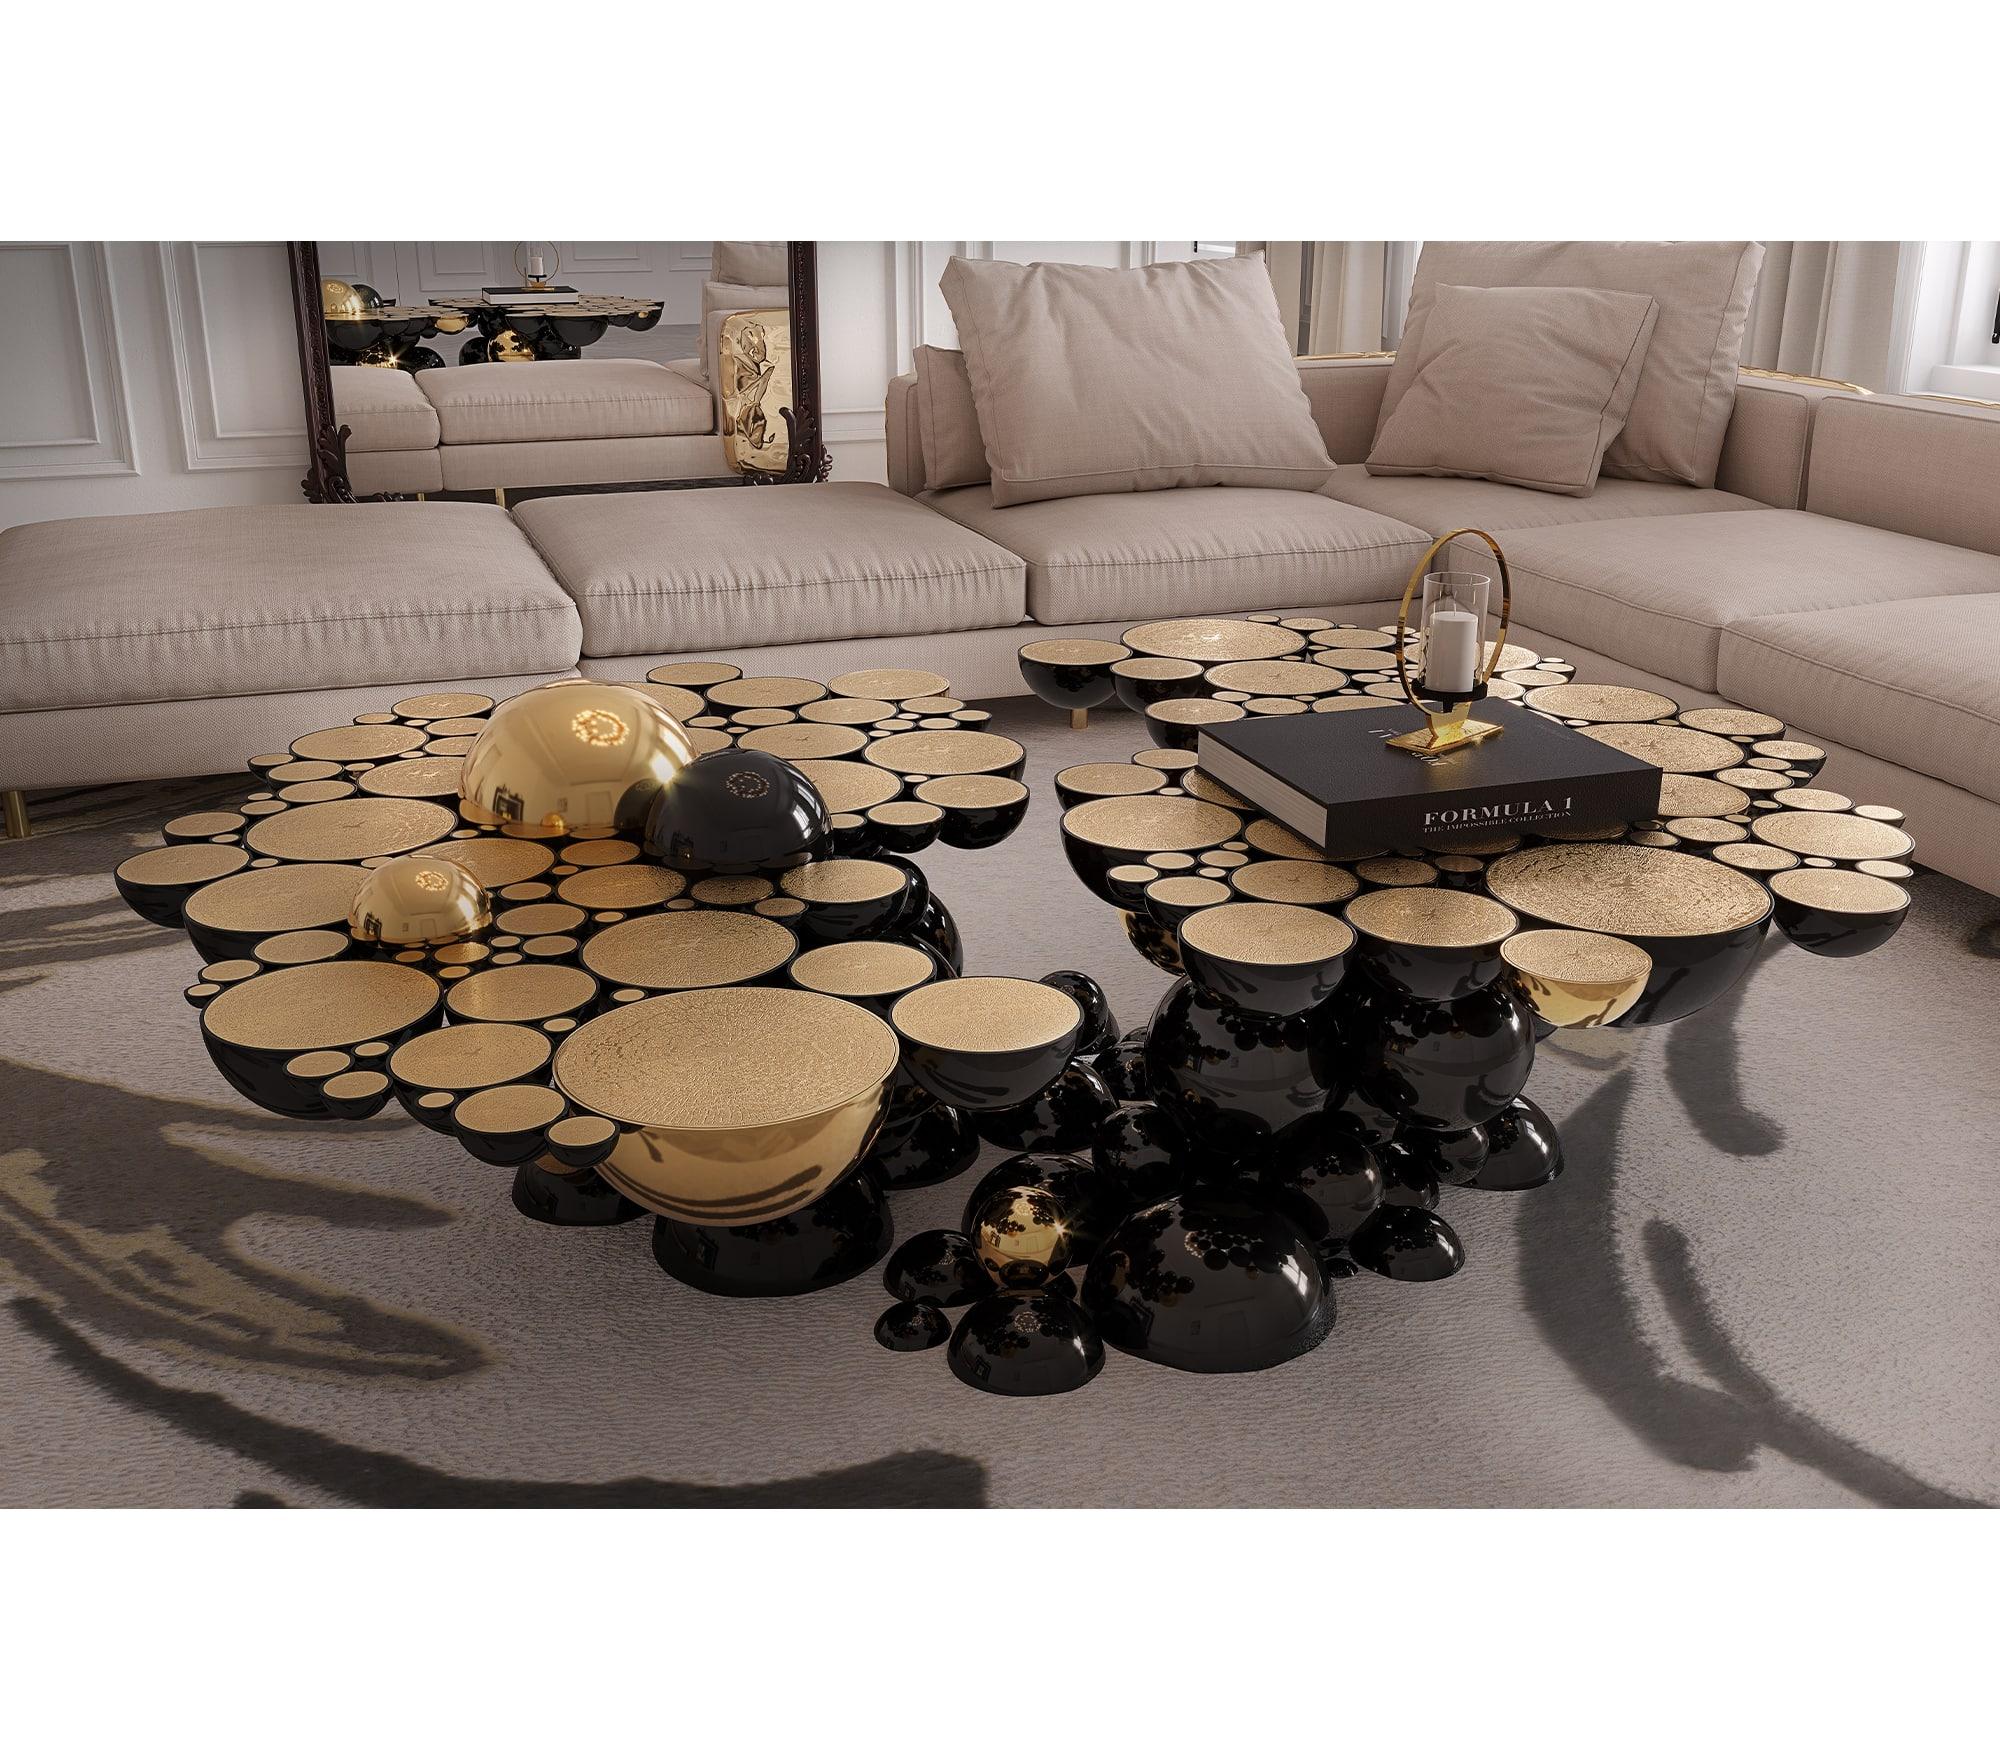 Modern Newton Center Table in Black Lacquer with Golden Details by Boca do Lobo For Sale 2